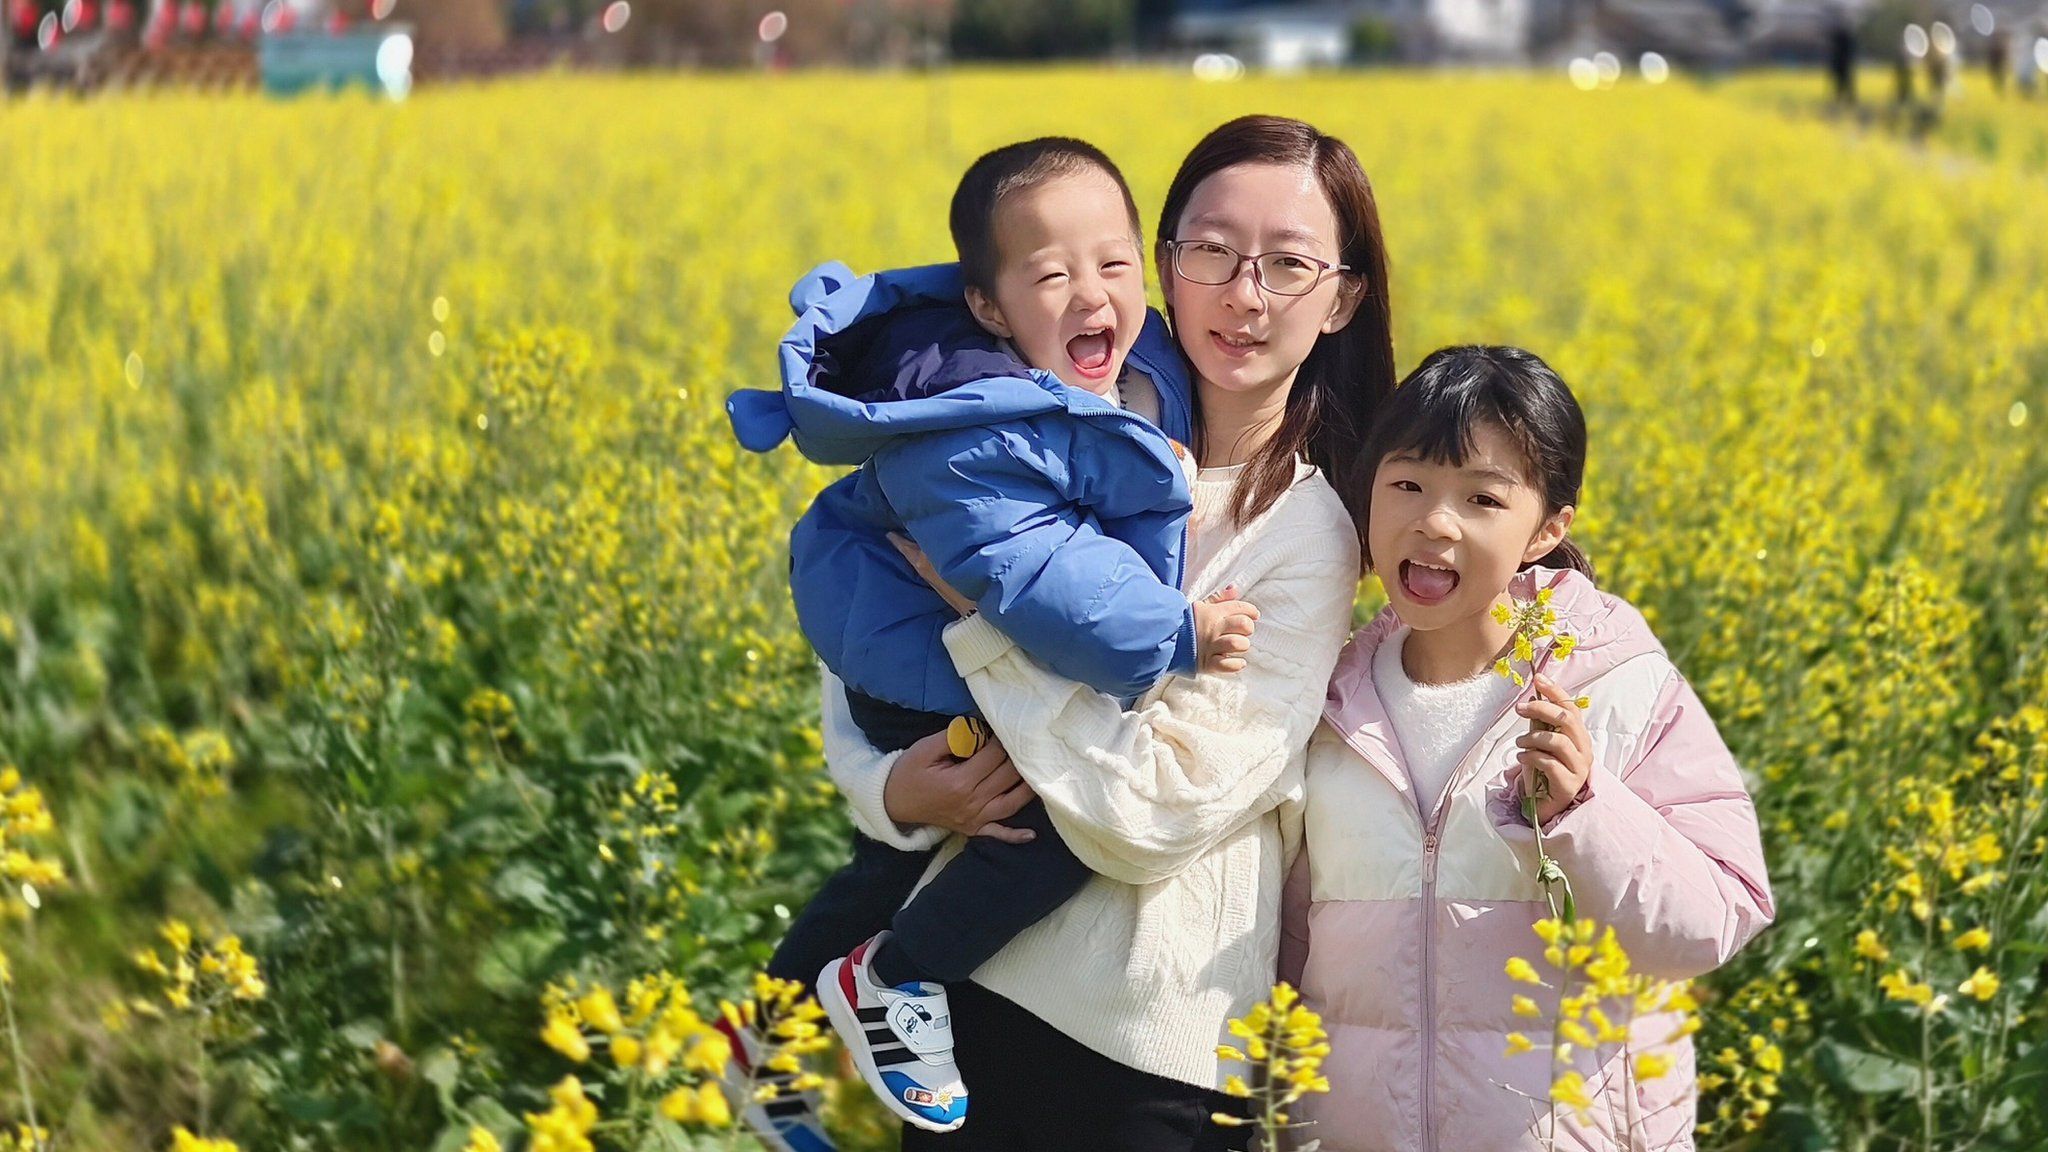 Kathy Zhuo and her two children.